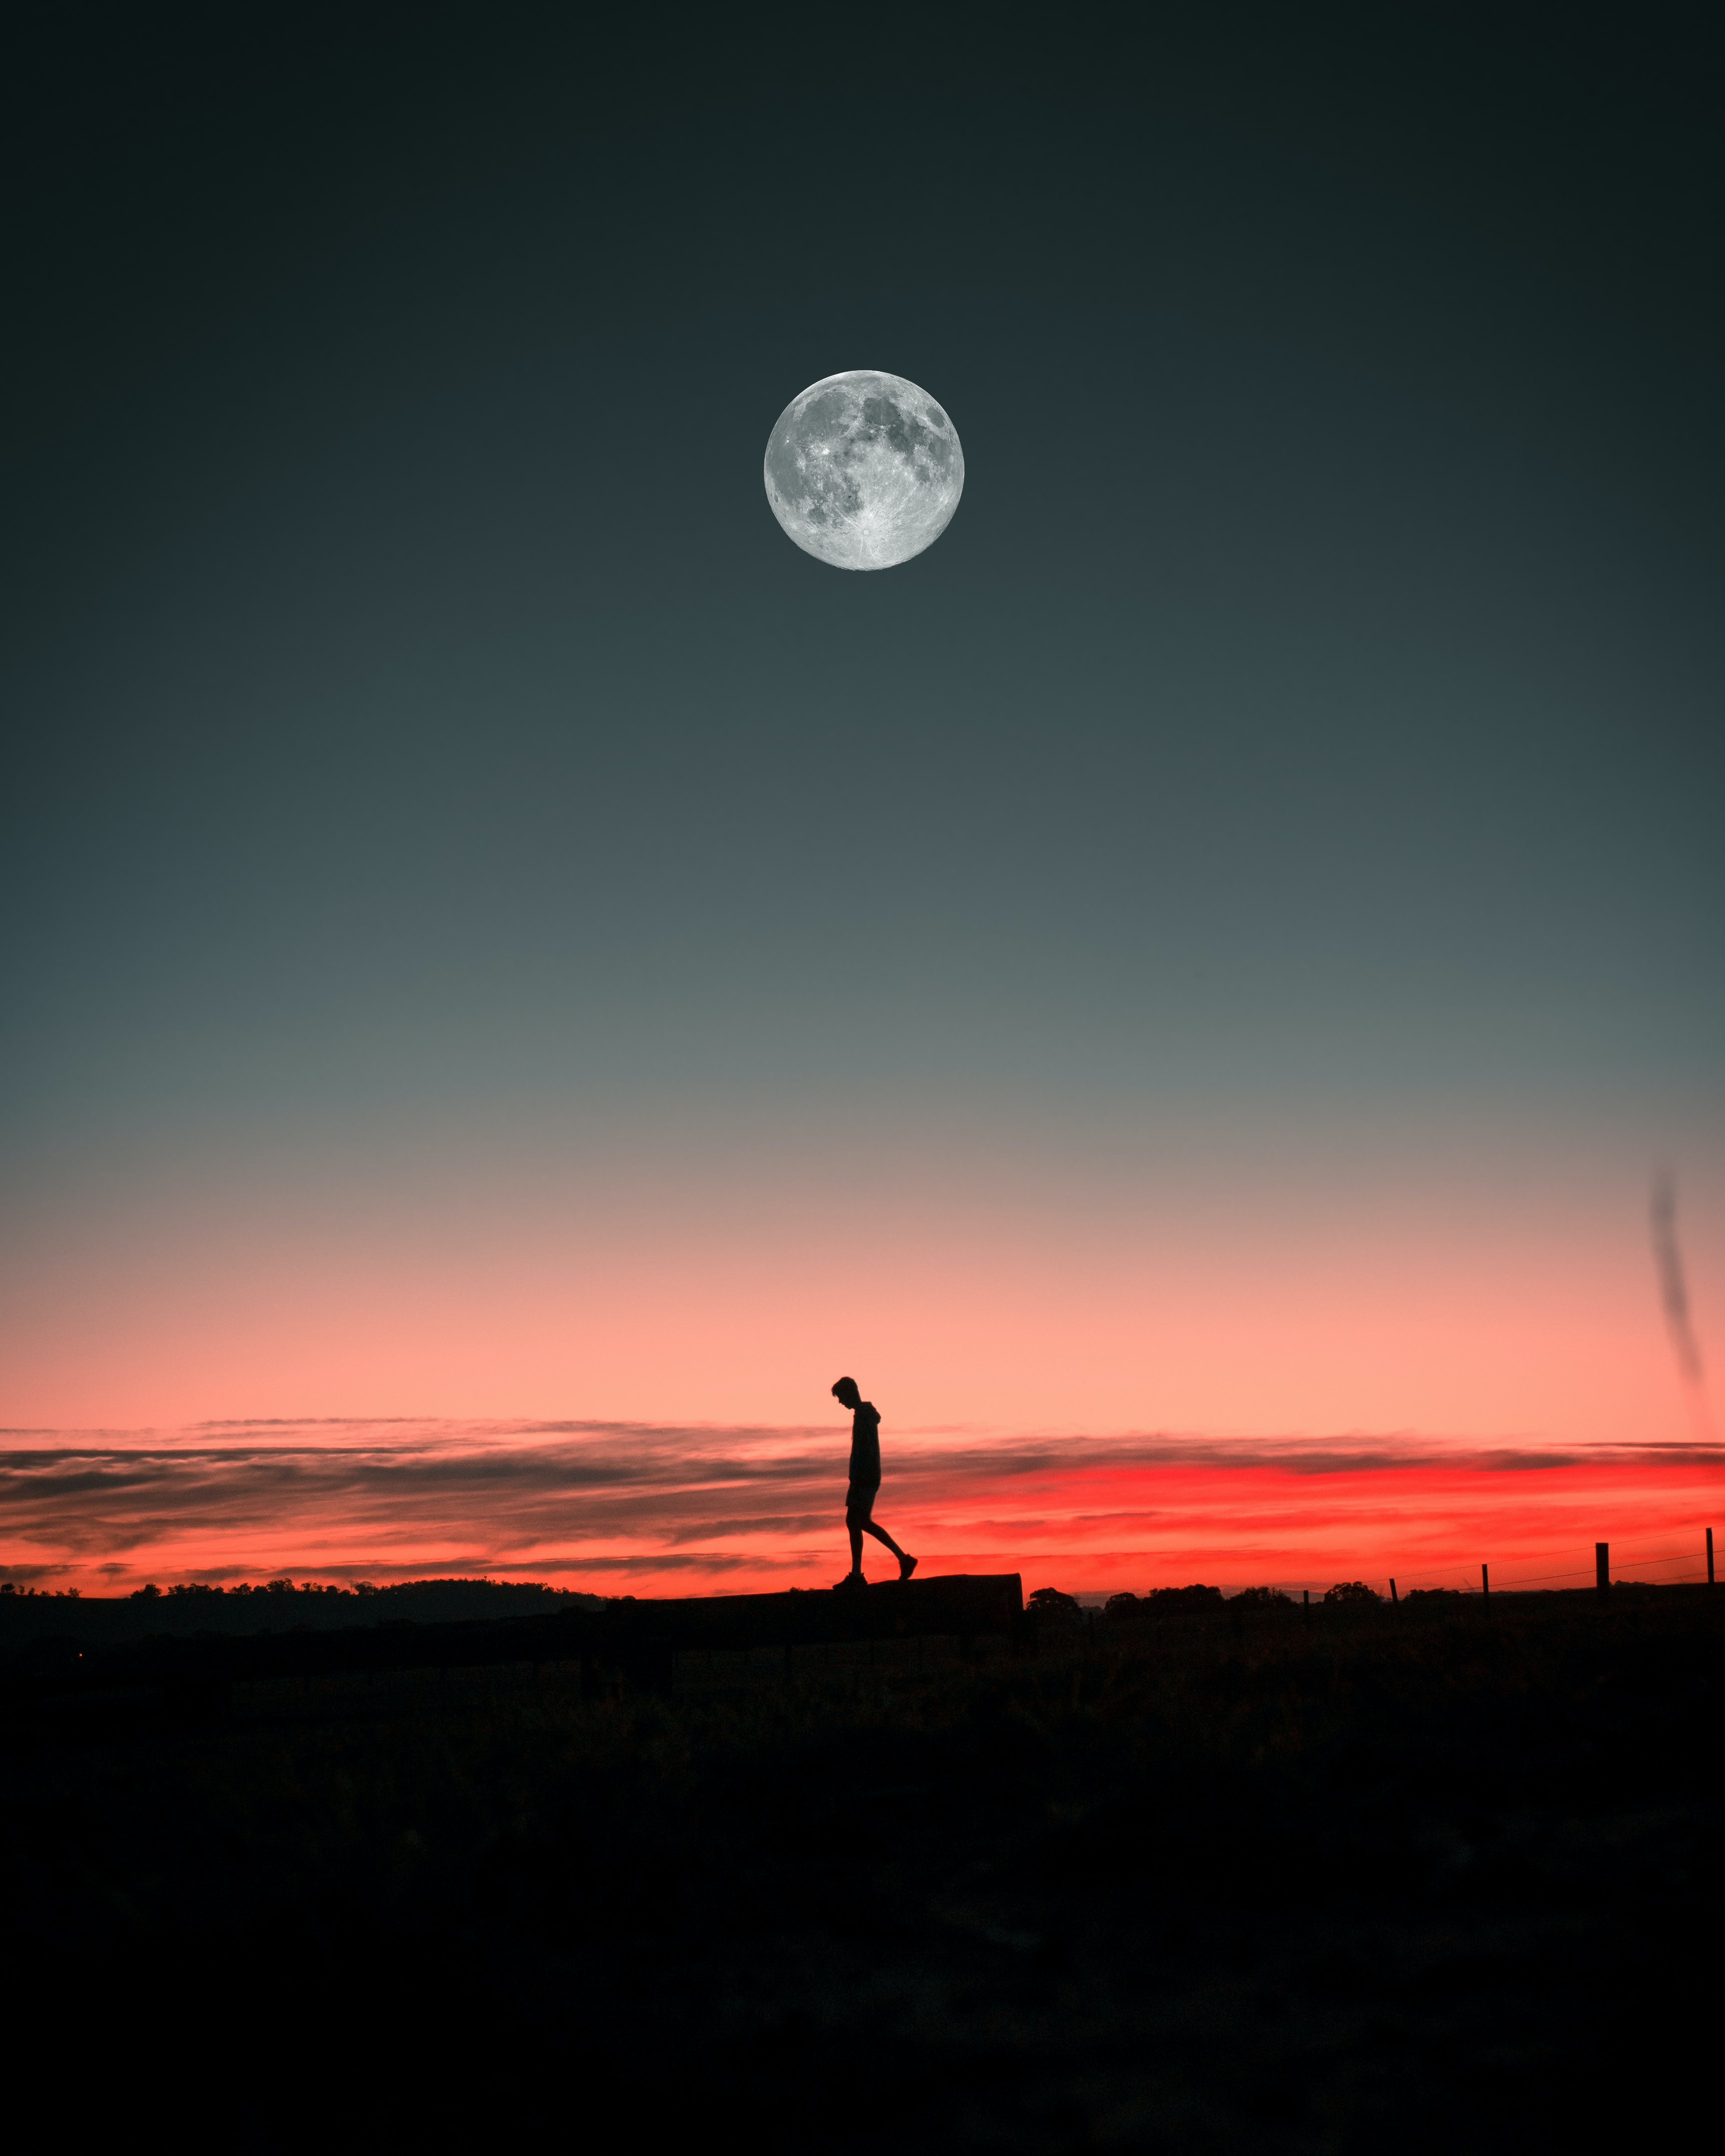 moon, alone, lonely, sunset, loneliness, silhouette, miscellanea, miscellaneous UHD